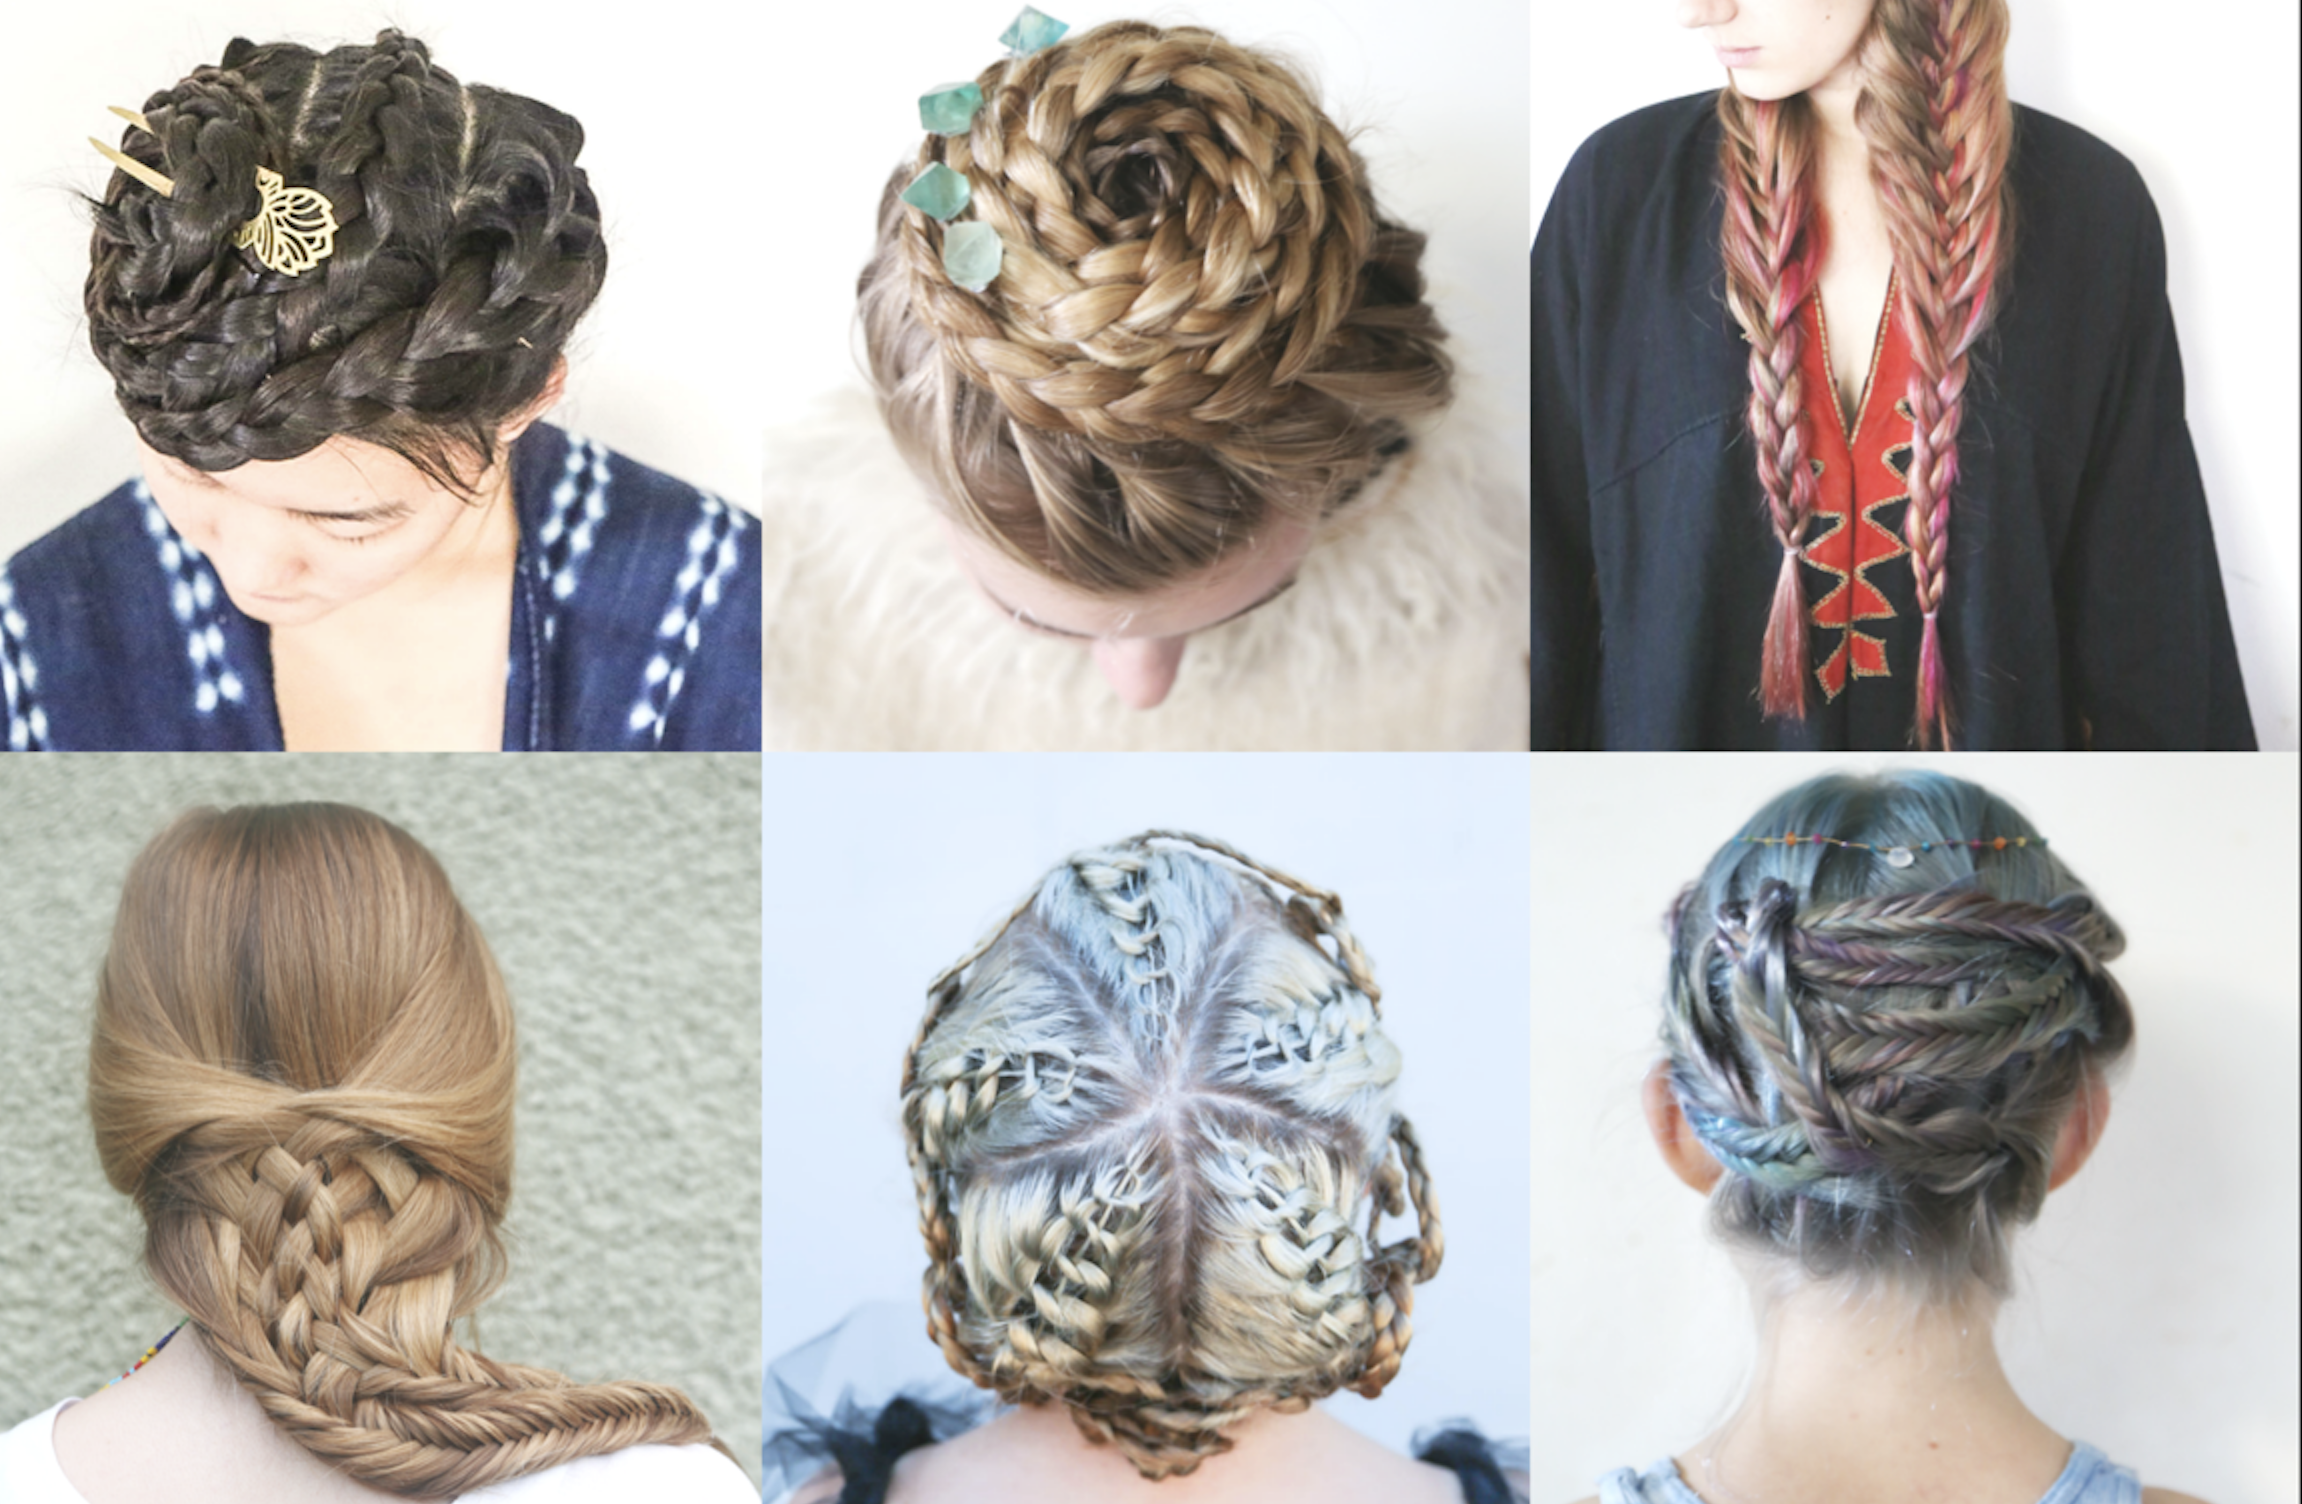 The Craft of Braiding: A Workshop